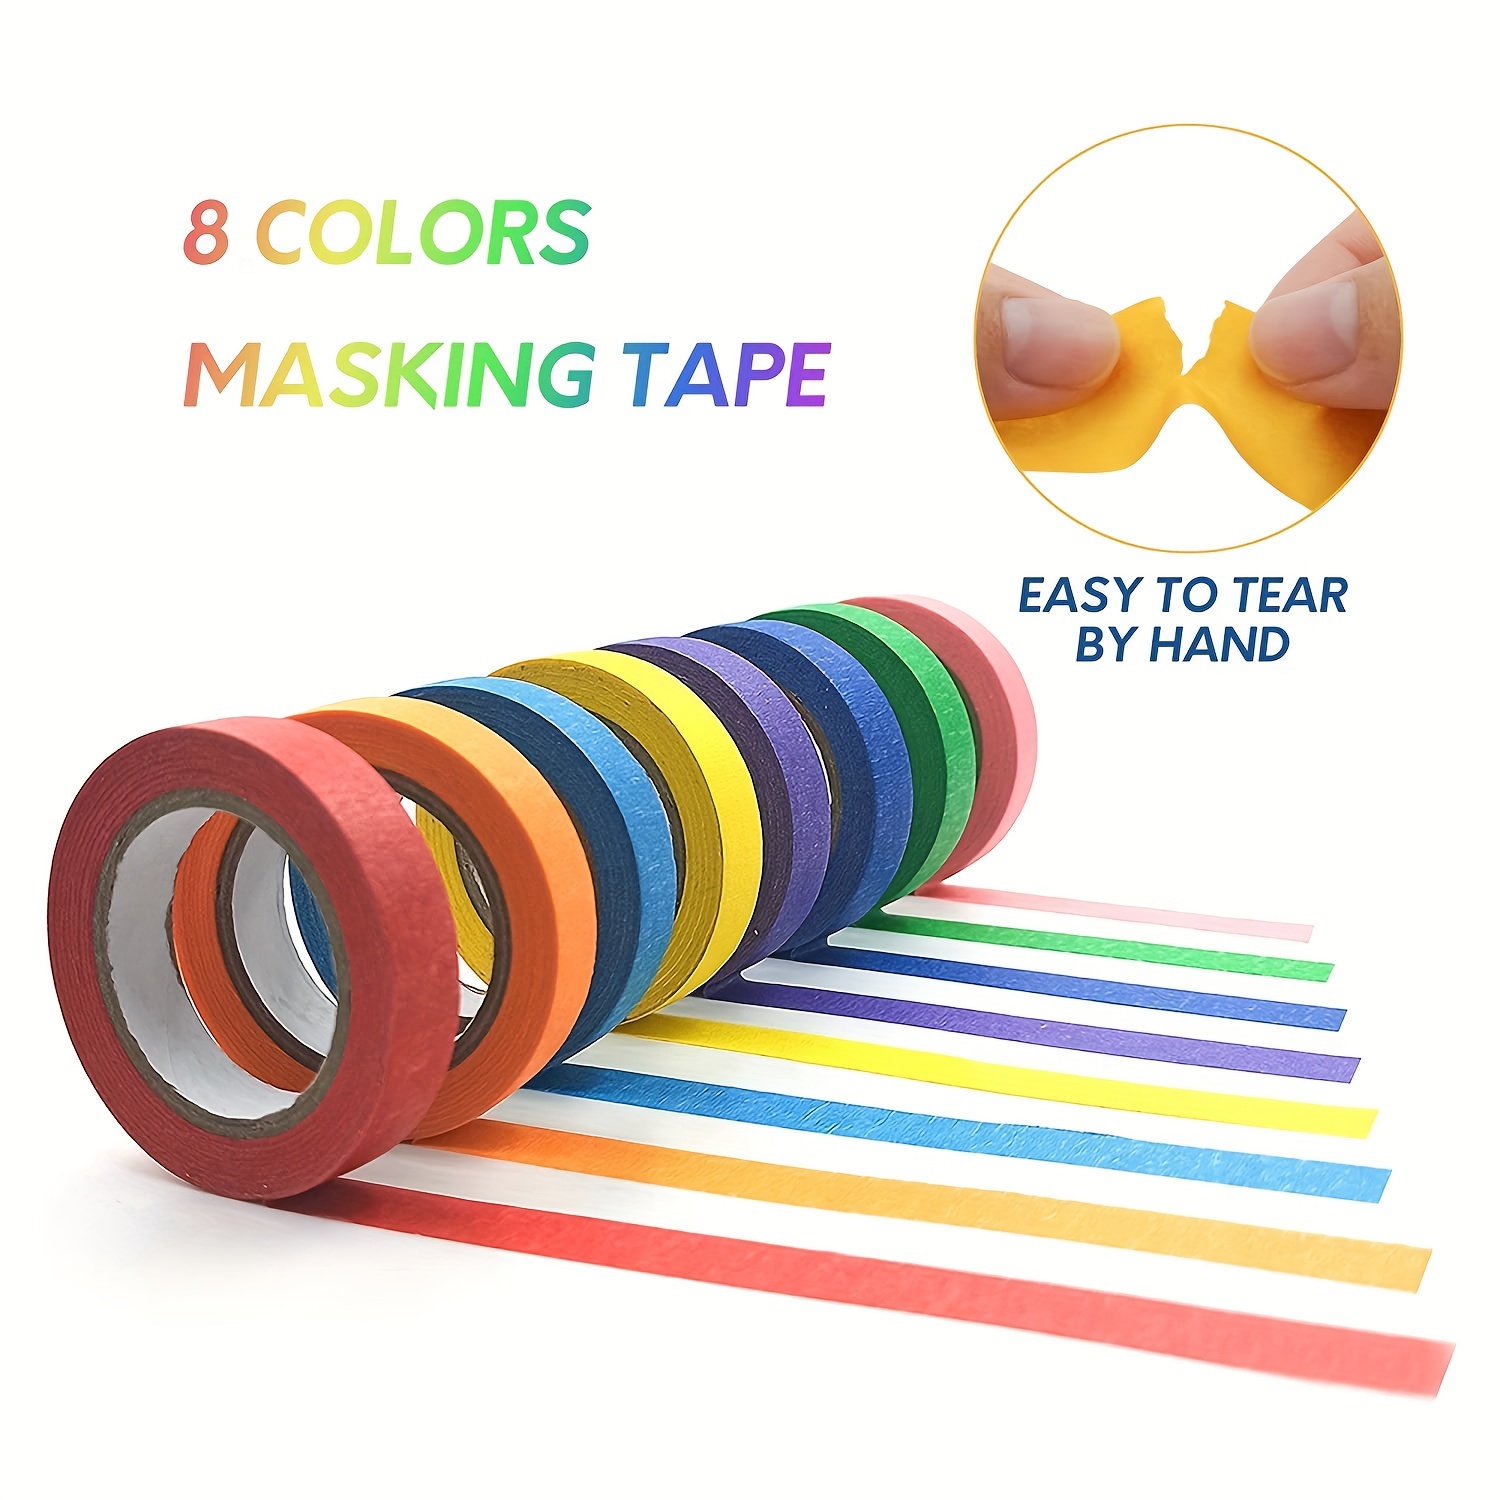 1 Inch Colored Painters Tape Set, Writable Rainbow Masking Tape, Washi  Decorative Tape for Labeling or Coding, DIY Scrapbook Designs, Art Tape